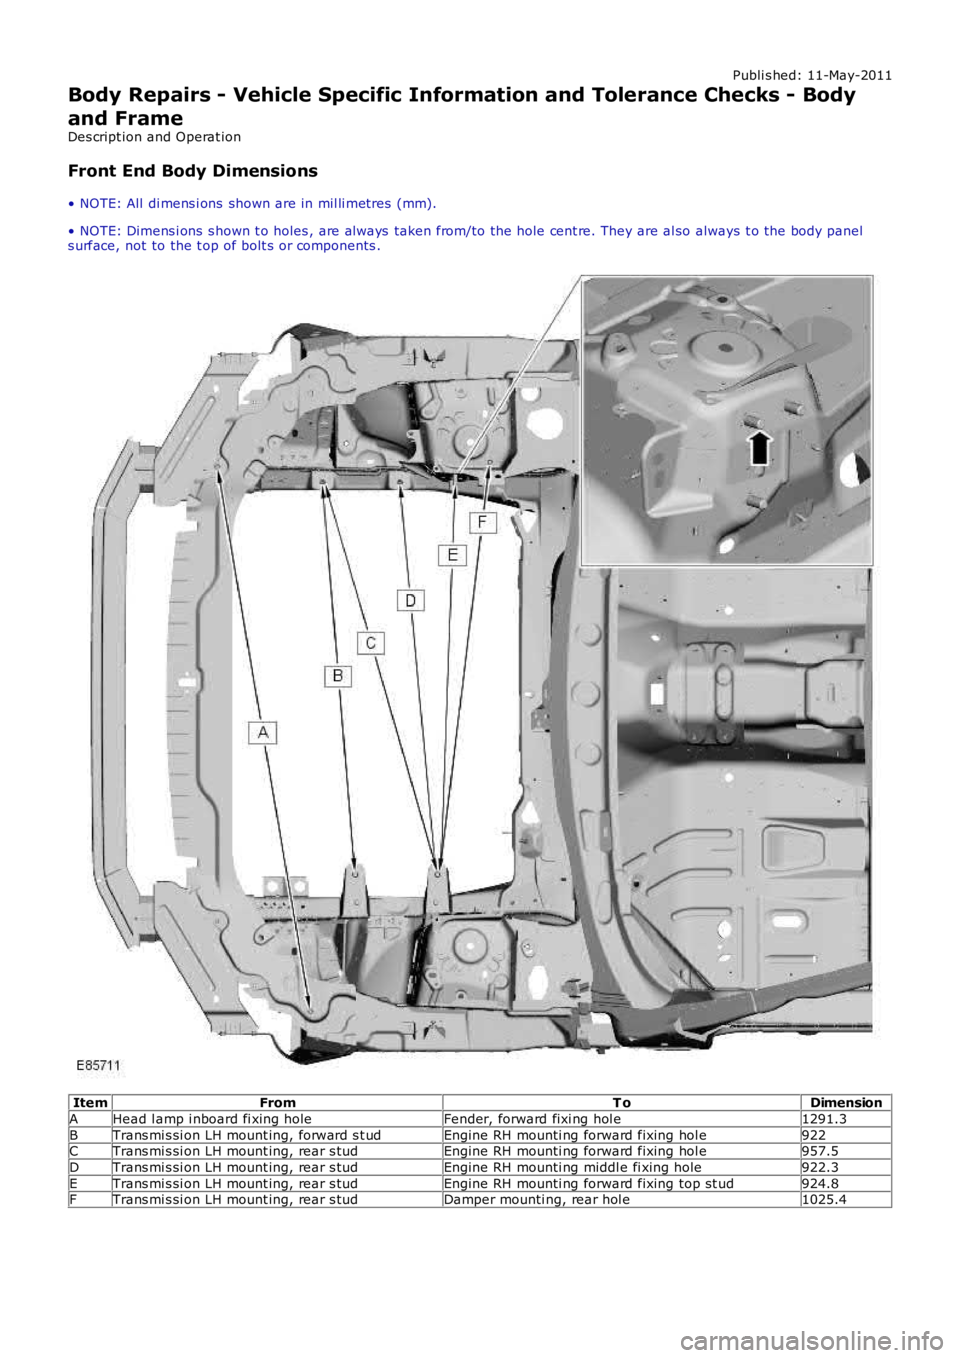 LAND ROVER FRELANDER 2 2006  Repair Manual Publi s hed: 11-May-2011
Body Repairs - Vehicle Specific Information and Tolerance Checks - Body
and Frame
Des cript ion and Operat ion
Front End Body Dimensions
• NOTE: All  di mens i ons  shown ar